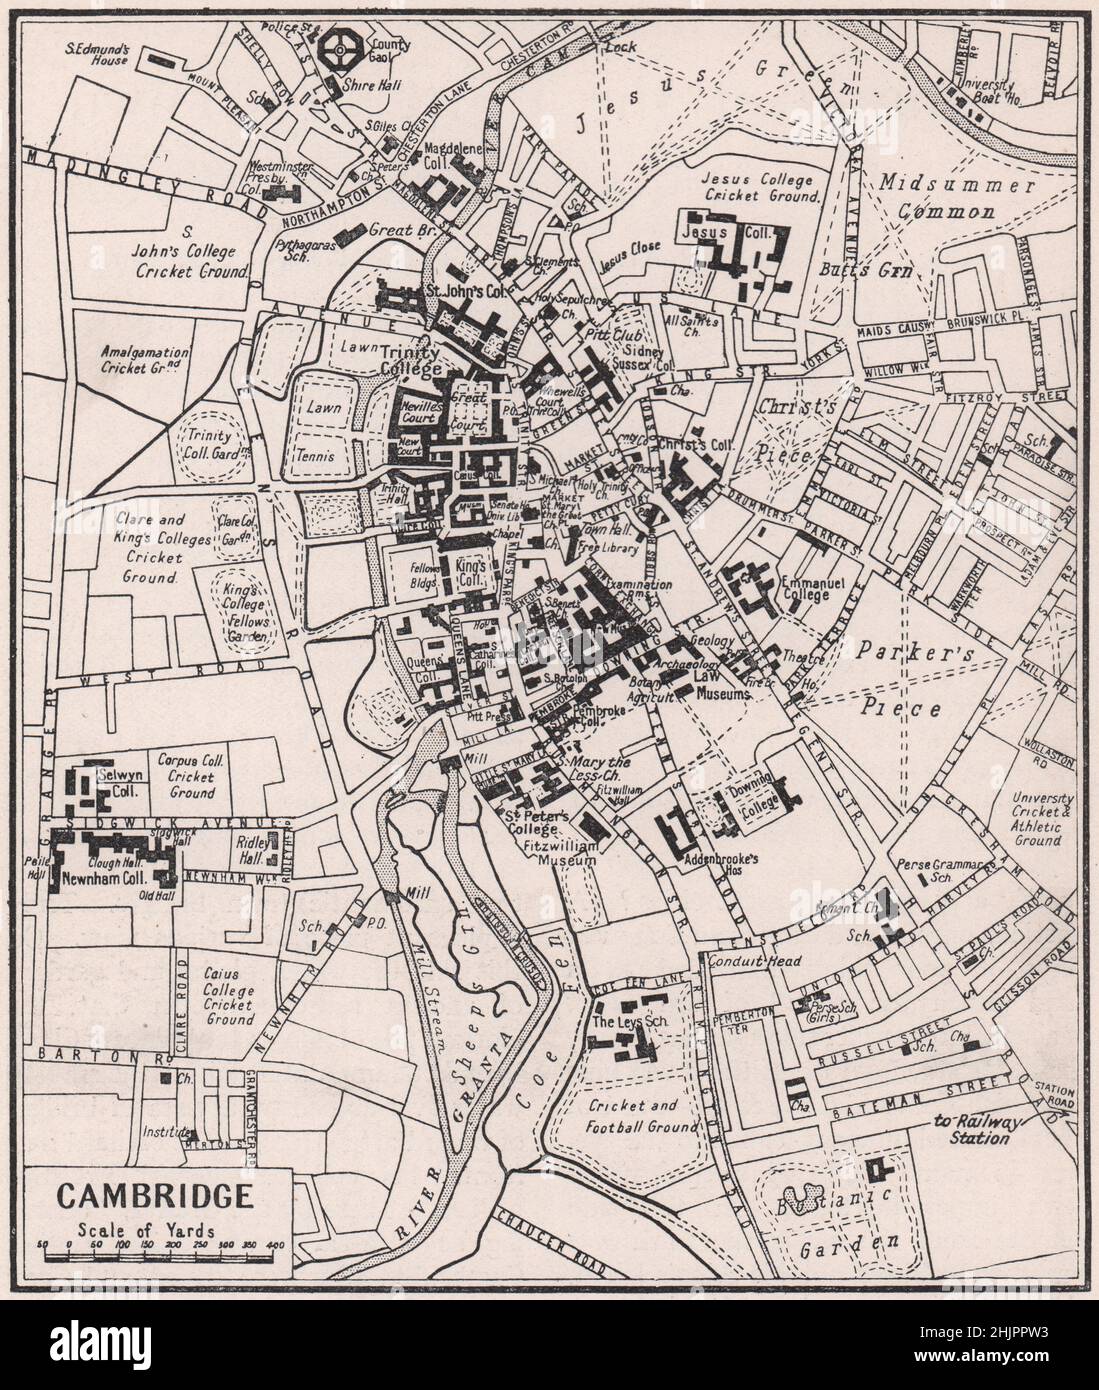 Cambridge and its colleges encircled by the Cam (1923 map) Stock Photo